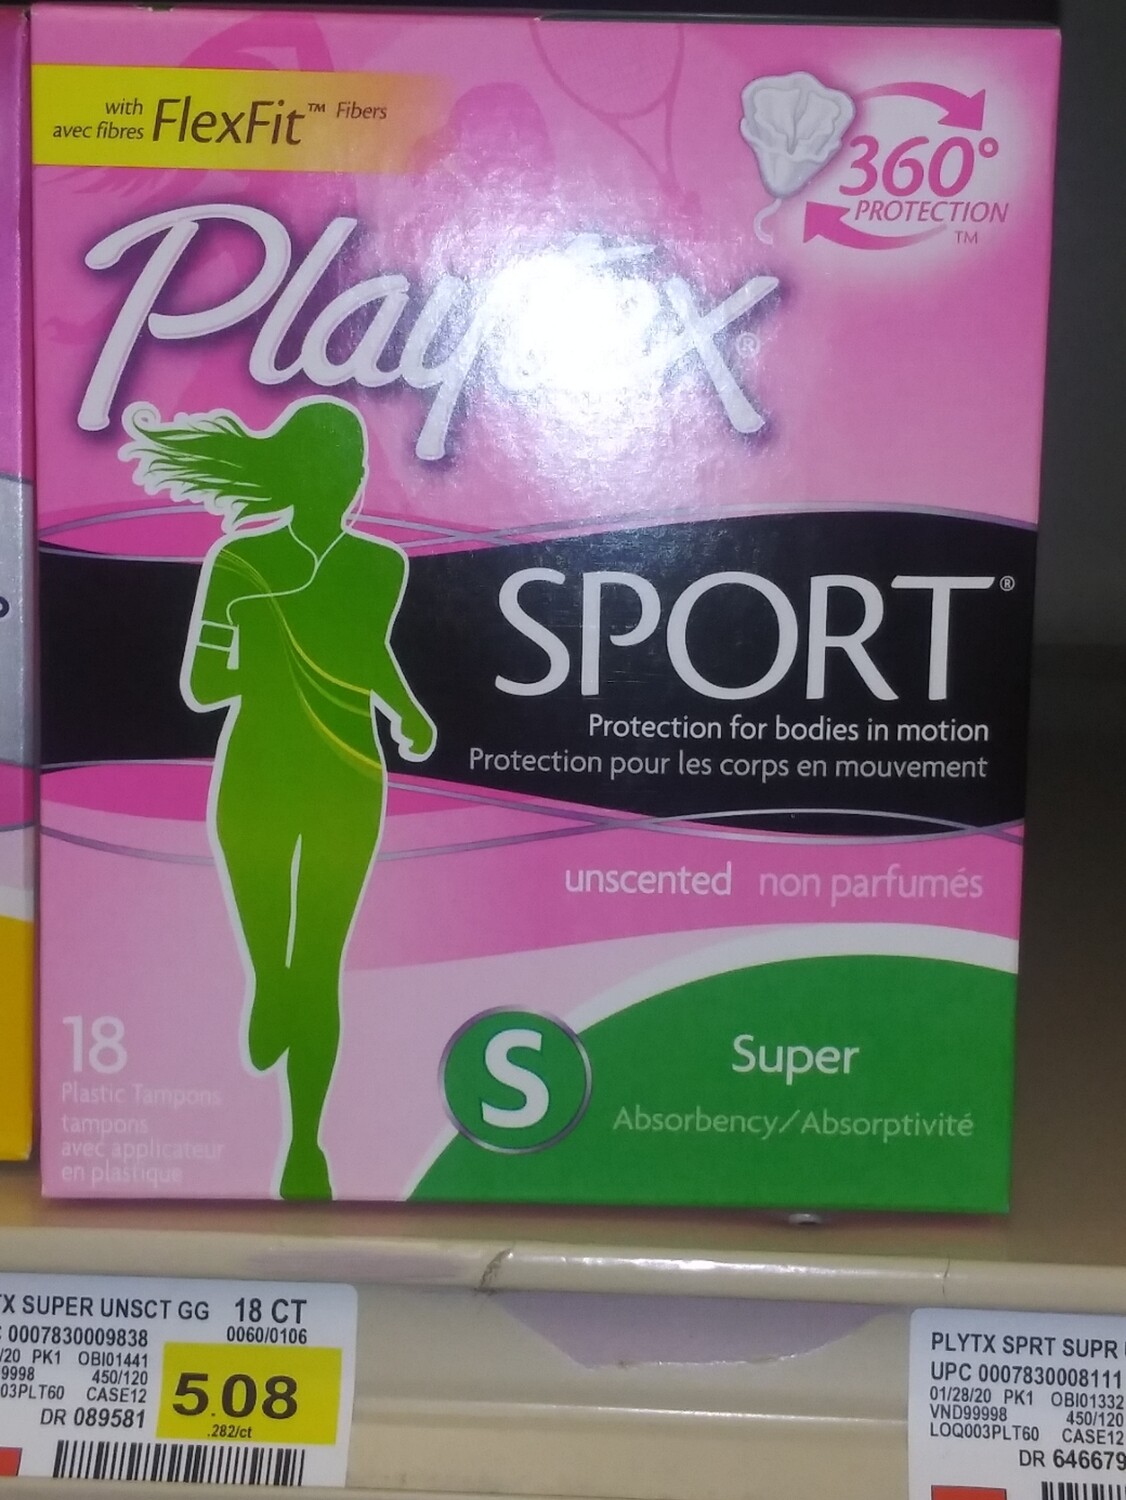 Cash Saver: Playtex Sport Unscented Tampons (Super) 18count